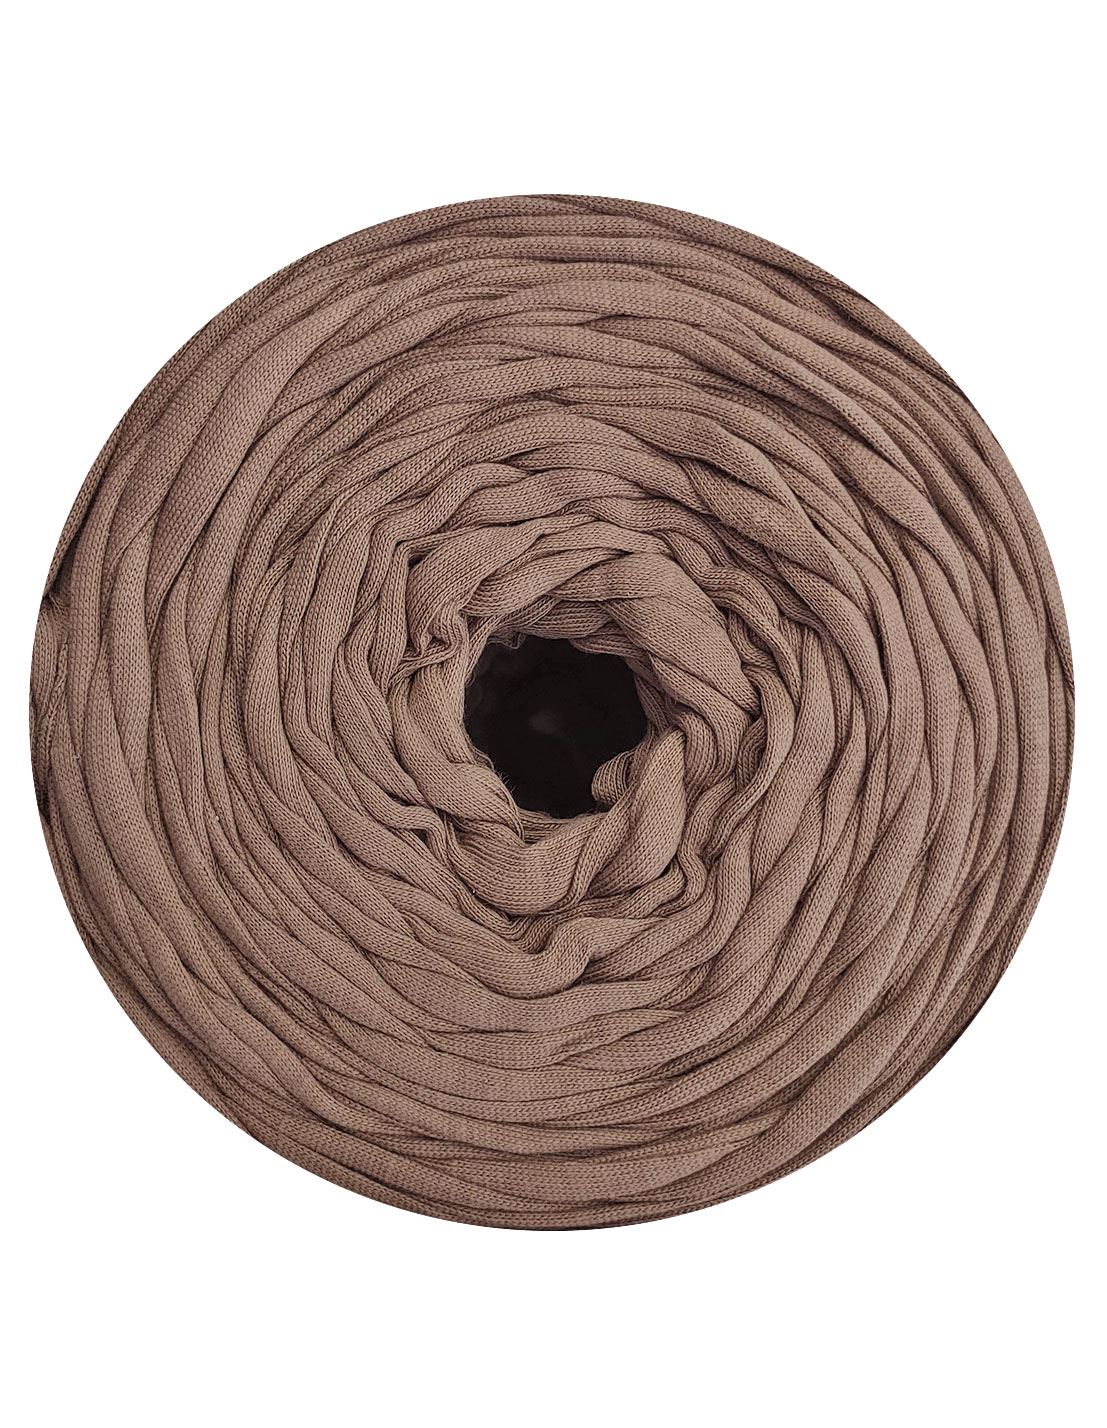 Desert taupe t-shirt yarn by Hoooked Zpagetti (100-120m)